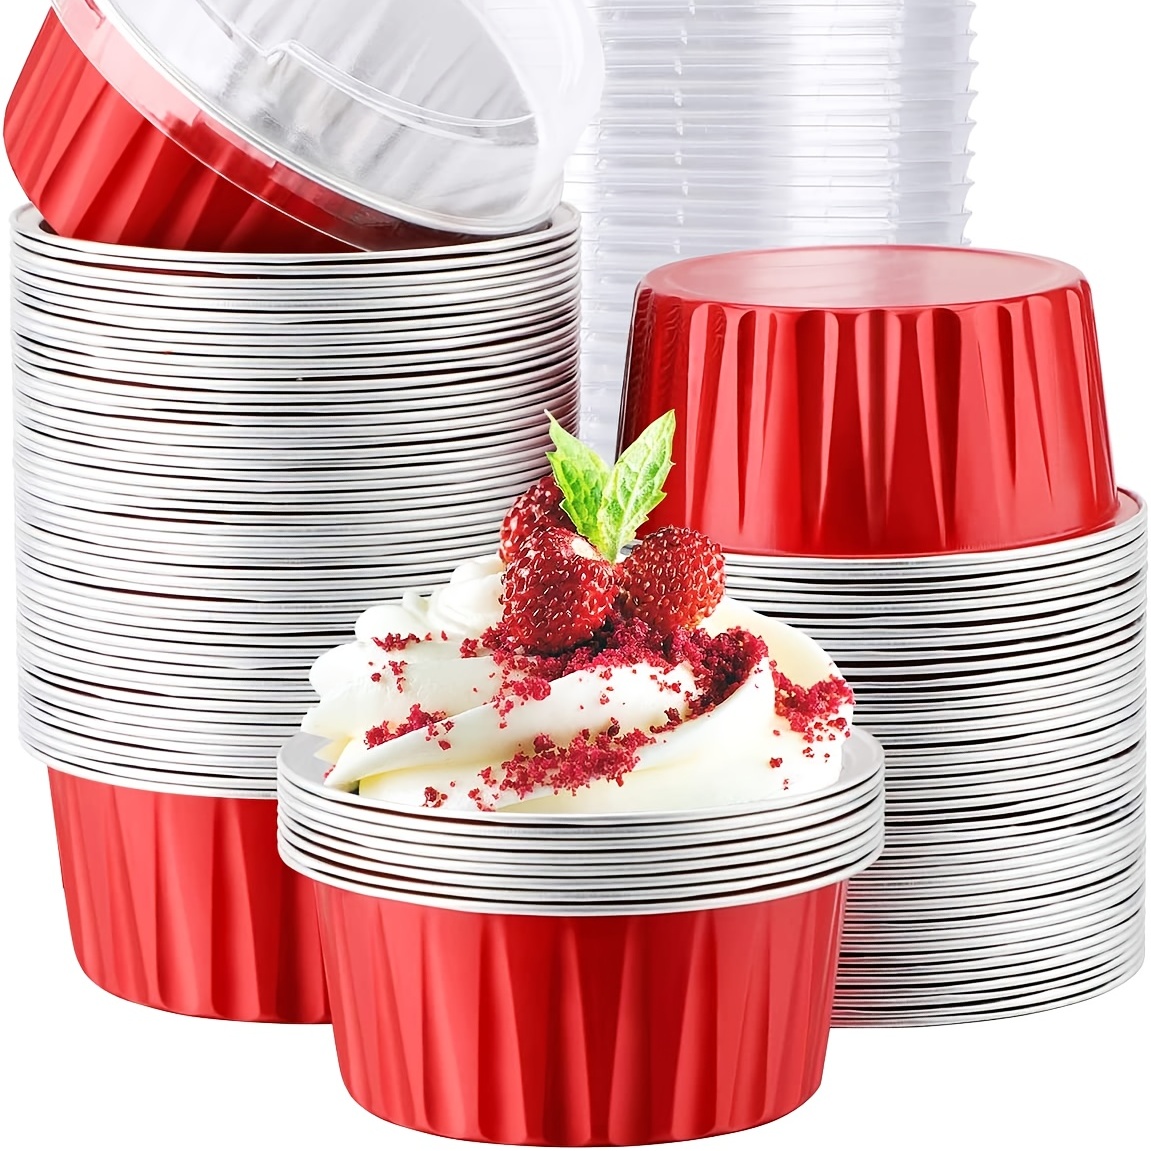 Cupcake Liners Muffin Liners, 100pcs Aluminum Foil Mini Baking Cups  Disposable Muffin Tin Cups Dessert Baking Cups Holders Cupcake Wrapper Cups  for